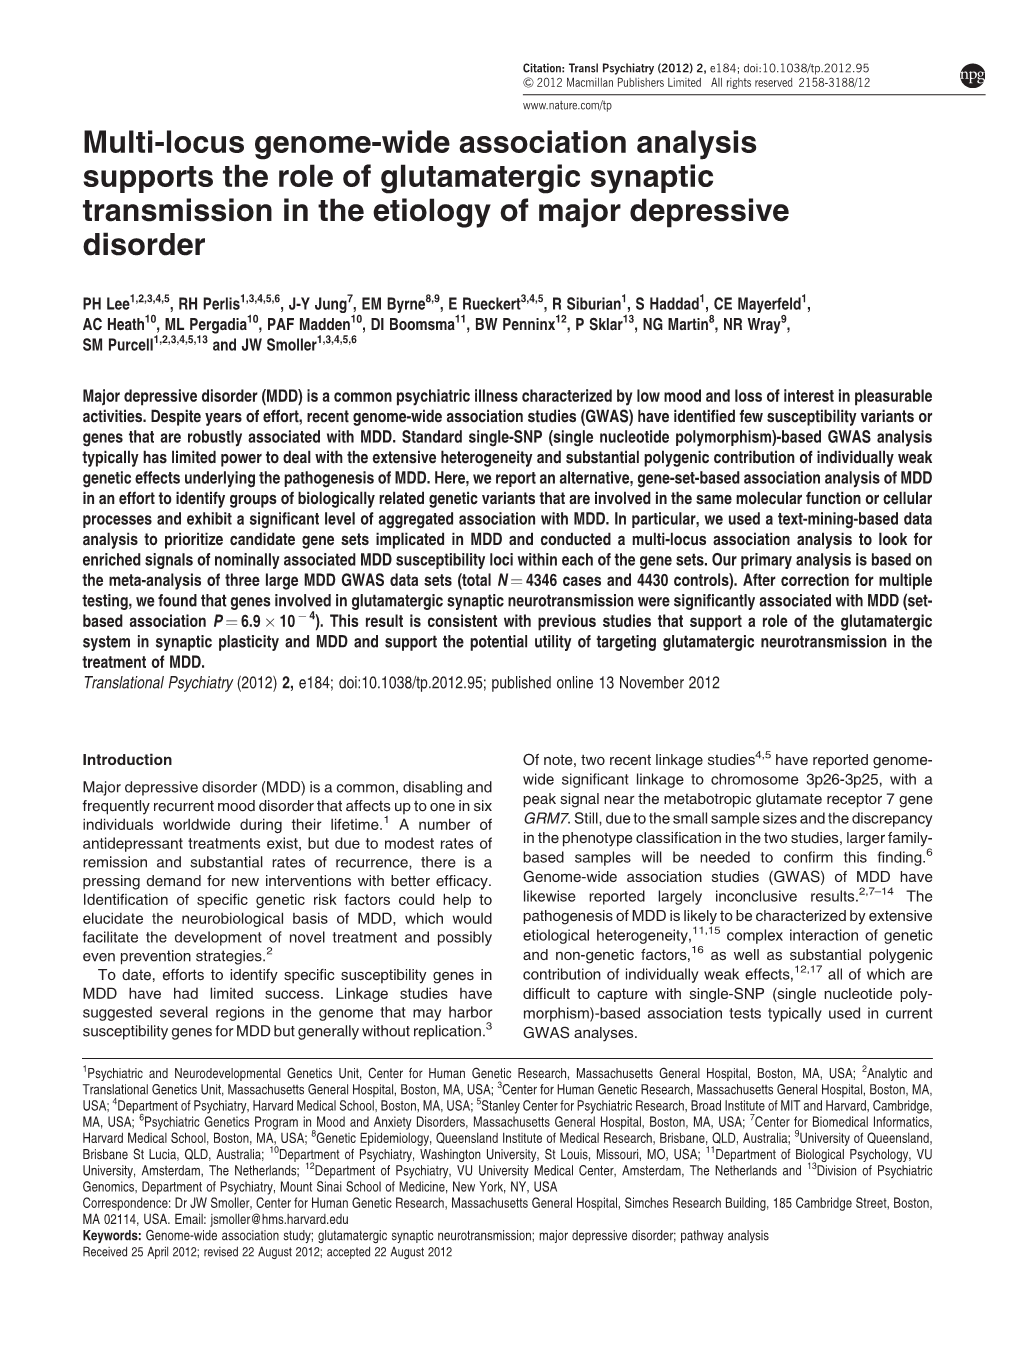 Multi-Locus Genome-Wide Association Analysis Supports the Role of Glutamatergic Synaptic Transmission in the Etiology of Major Depressive Disorder